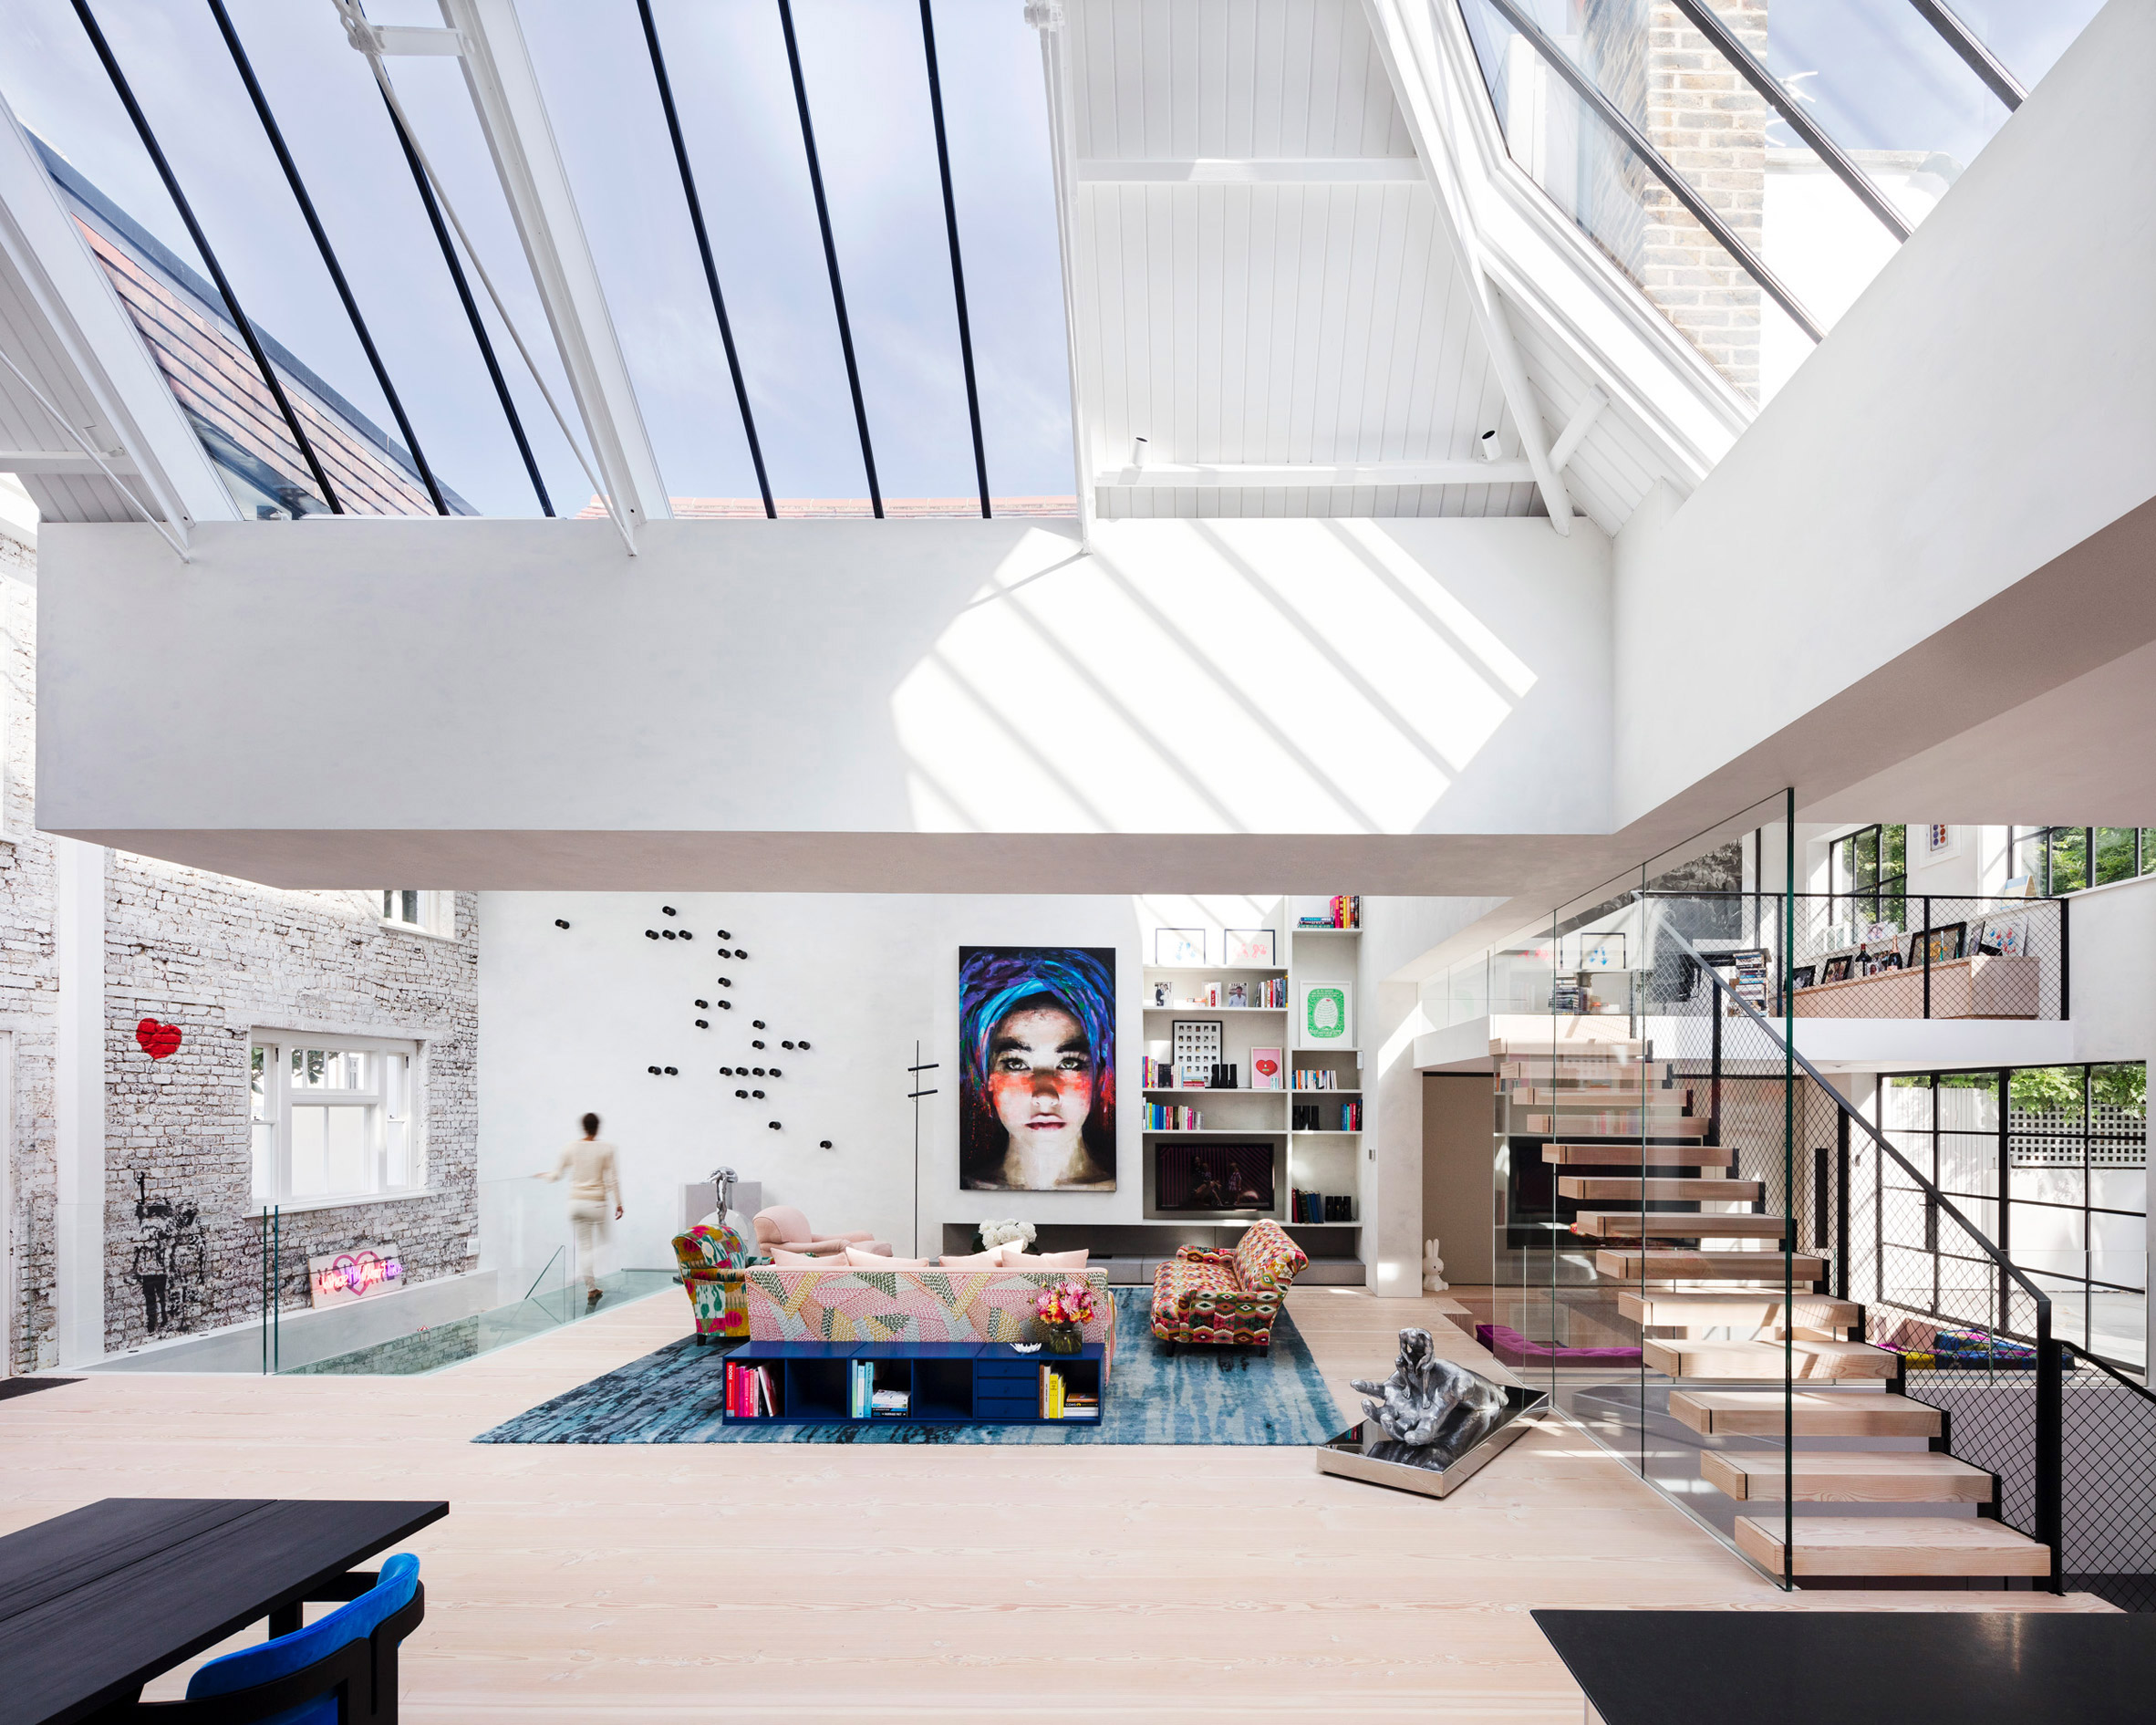 White loft space with skylights